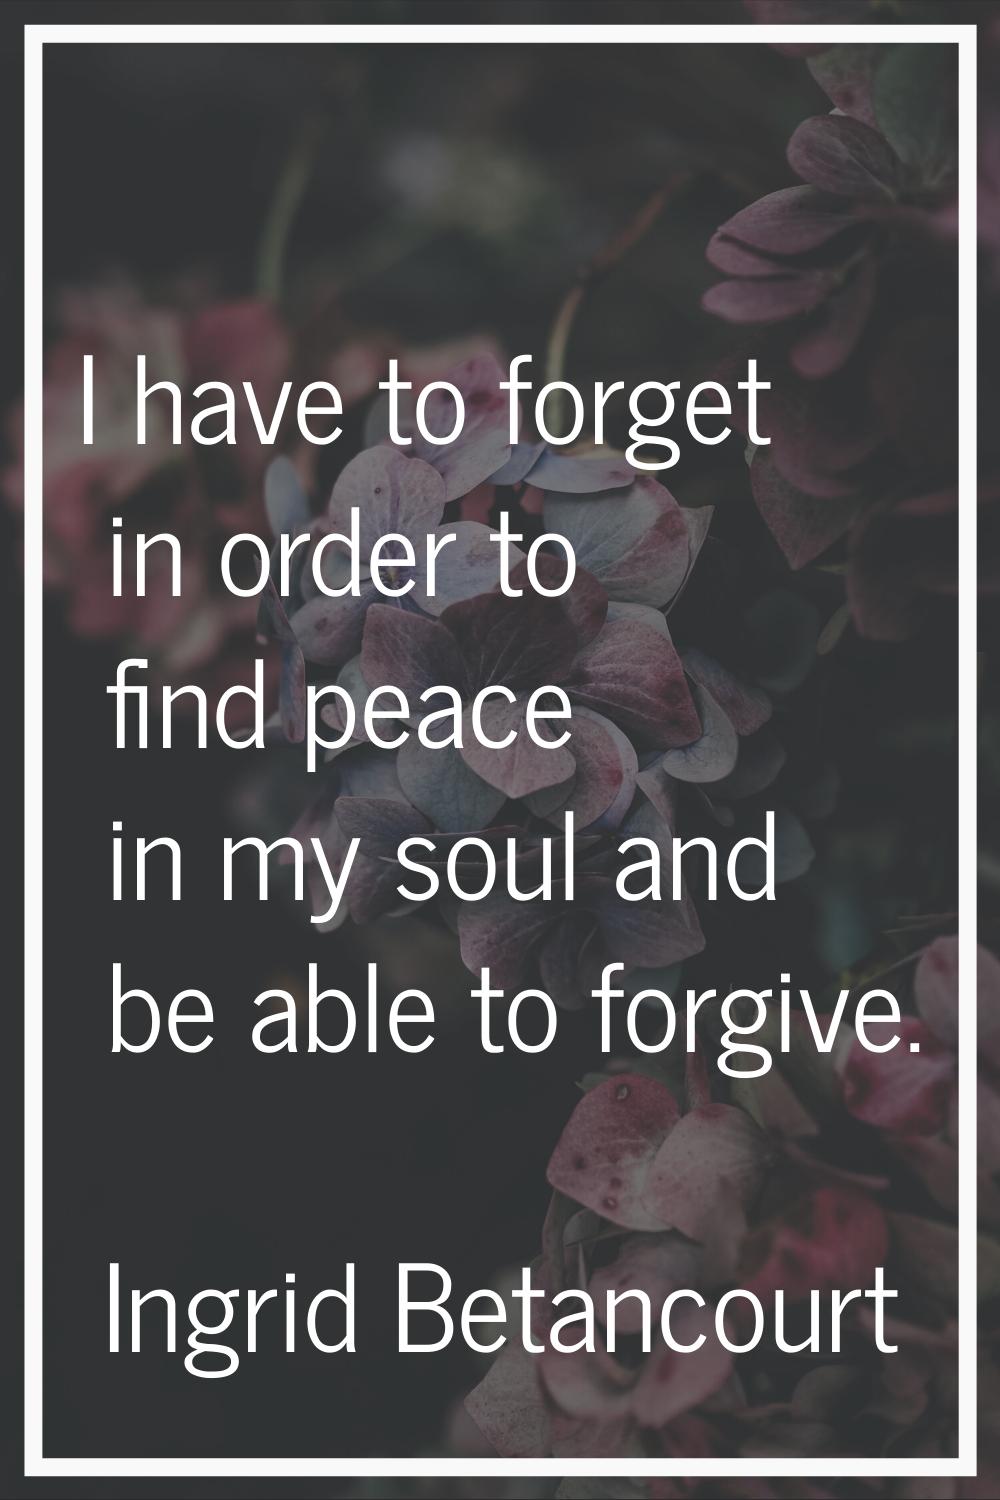 I have to forget in order to find peace in my soul and be able to forgive.